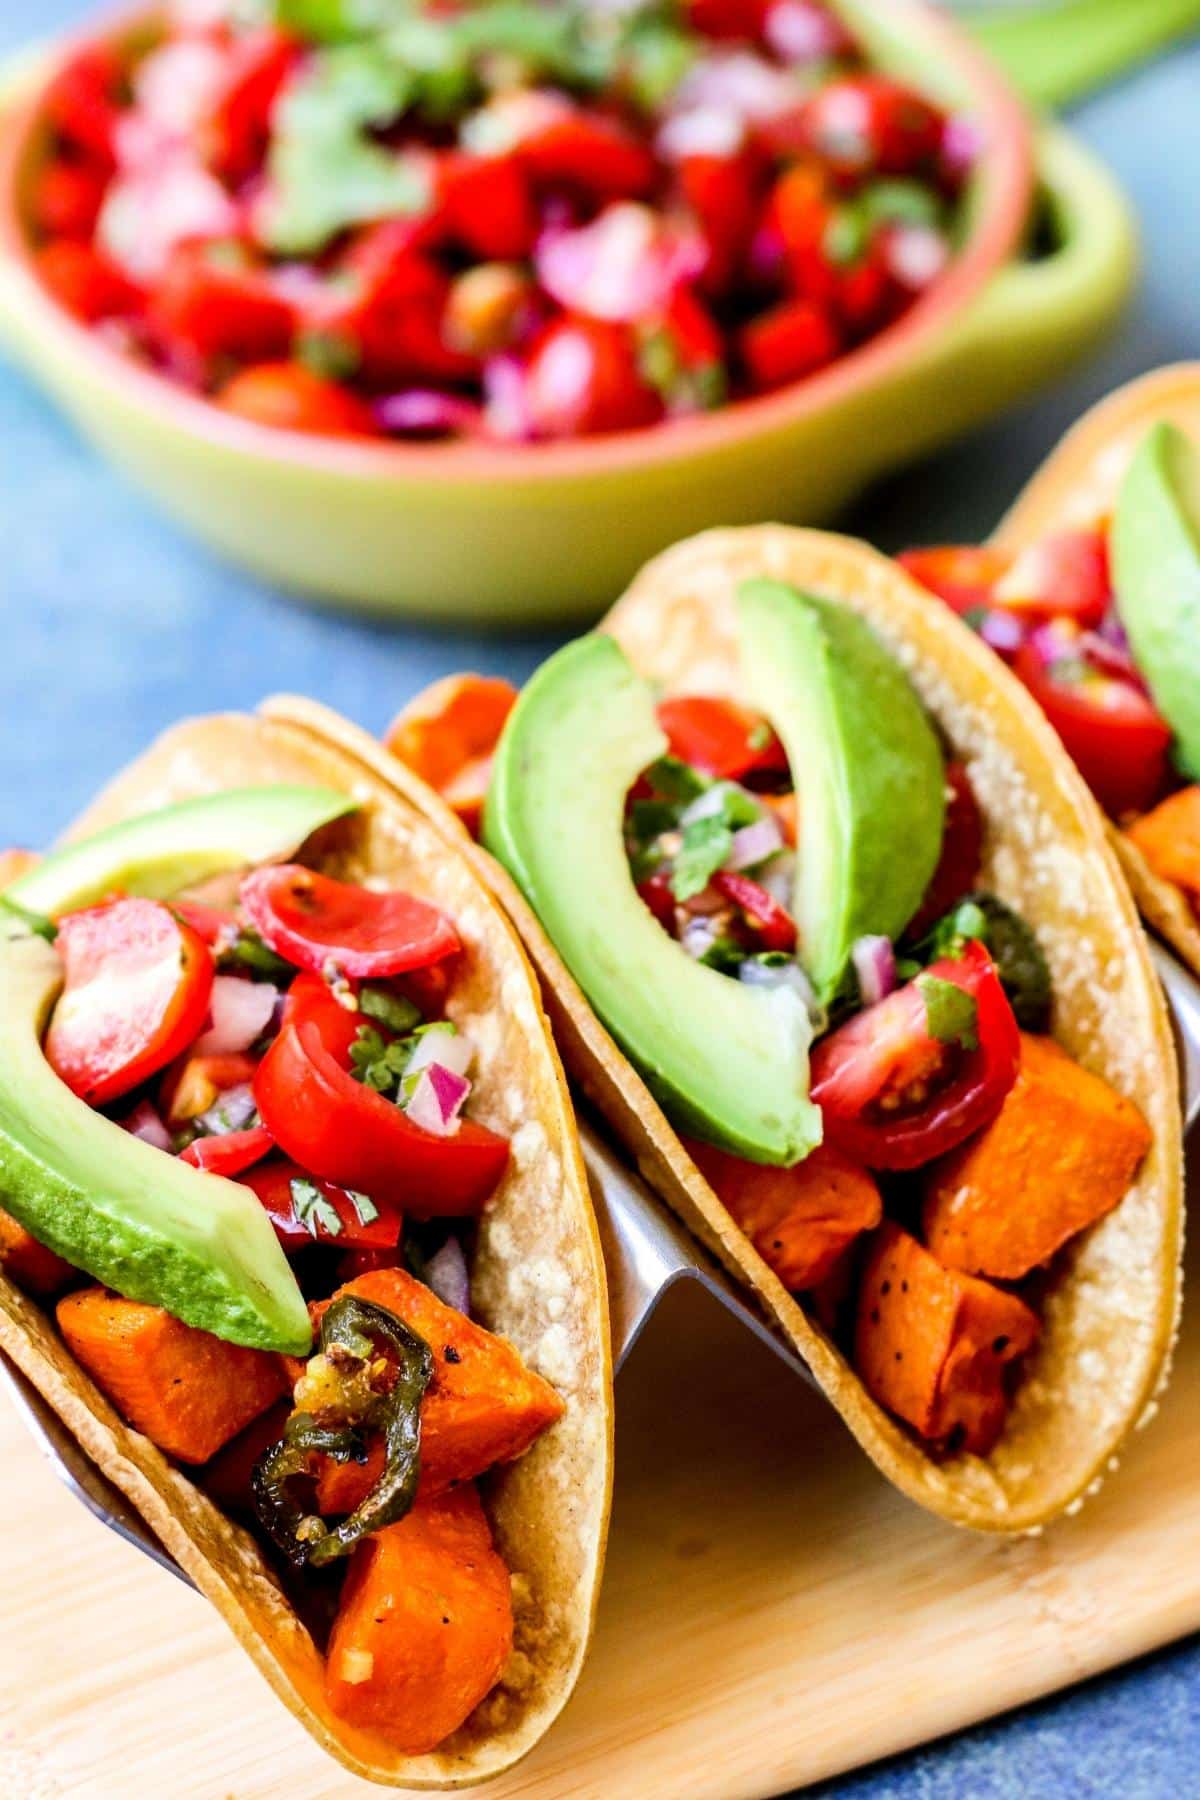 Tacos filled with roasted cubes of sweet potatoes and slices of jalapeño topped with fresh salsa and slices of avocado.